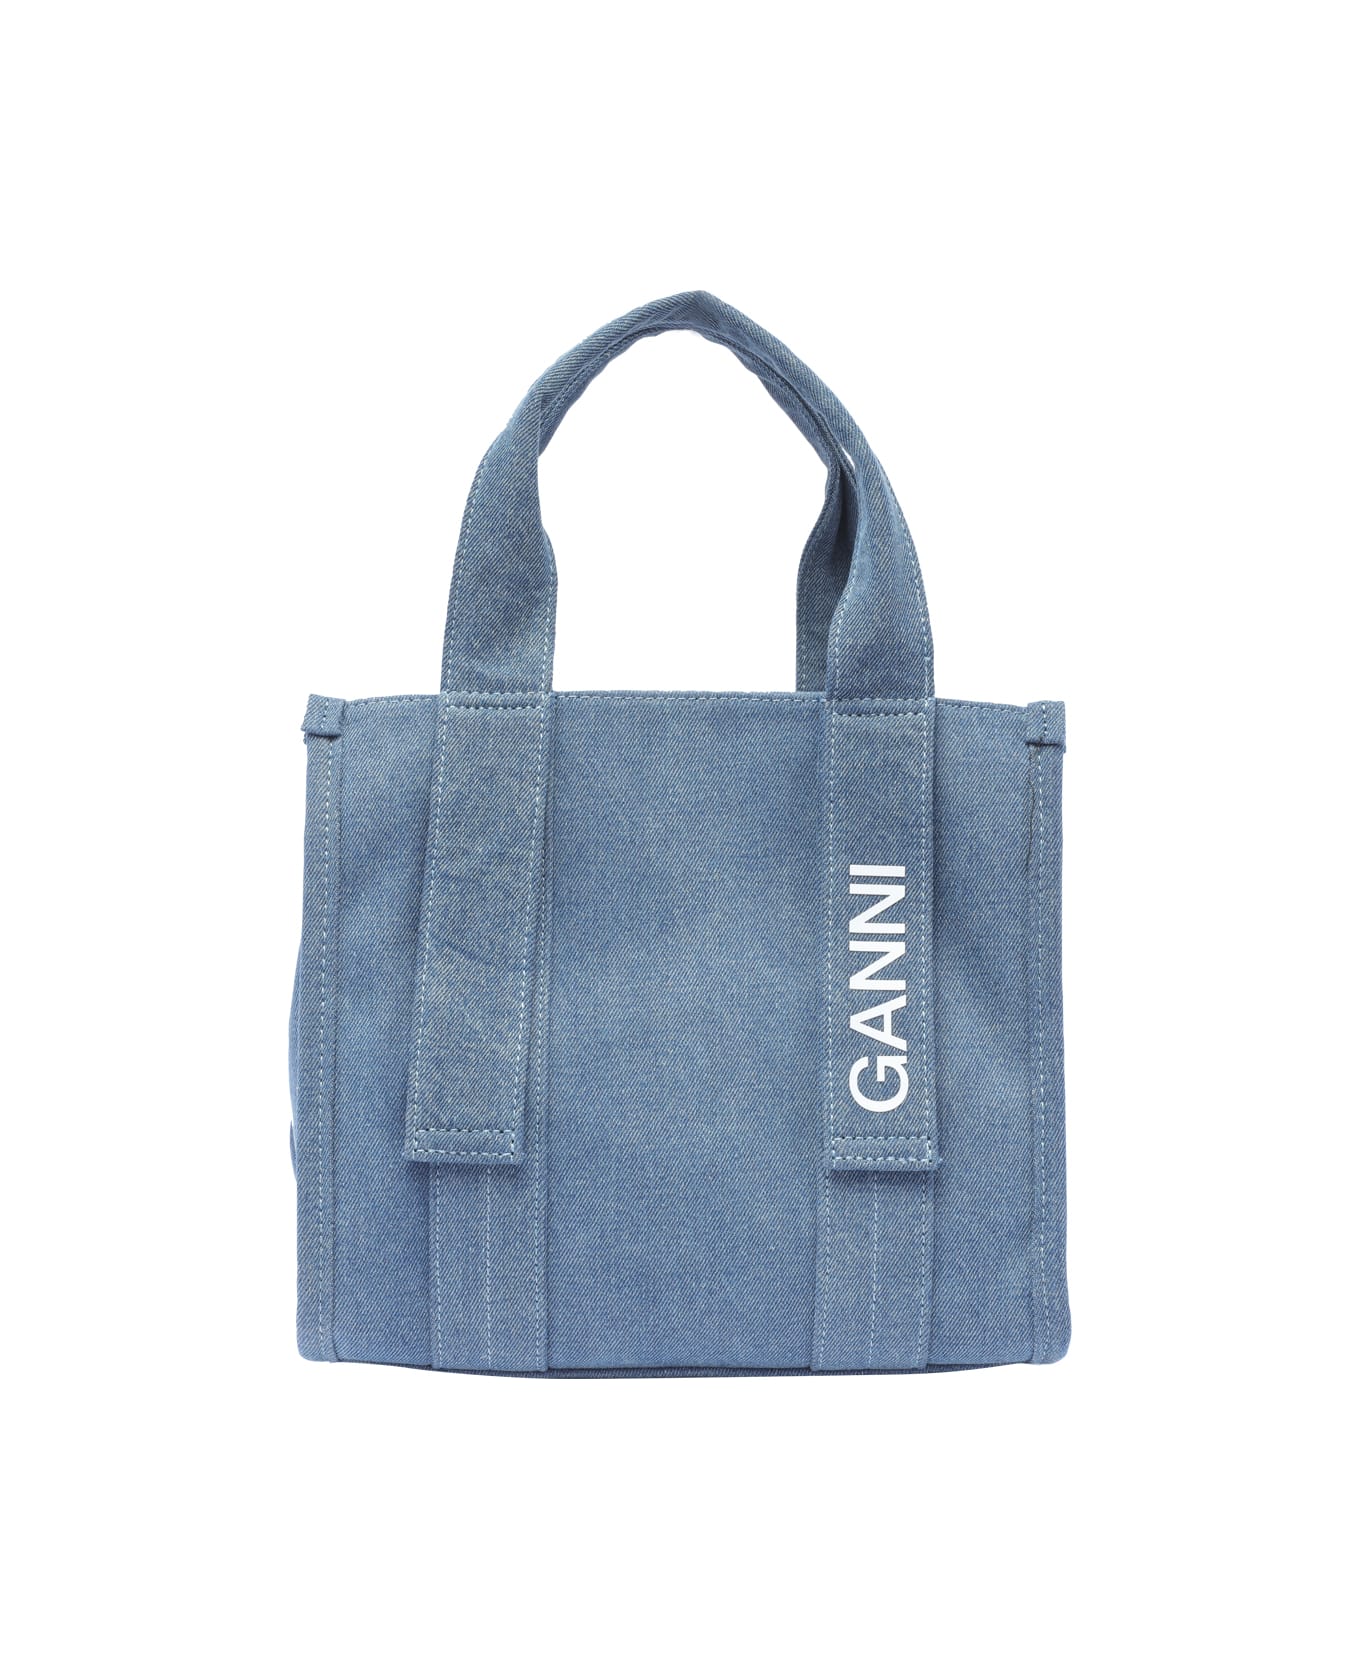 Ganni Recycled Tech Small Tote Denim - BLUE